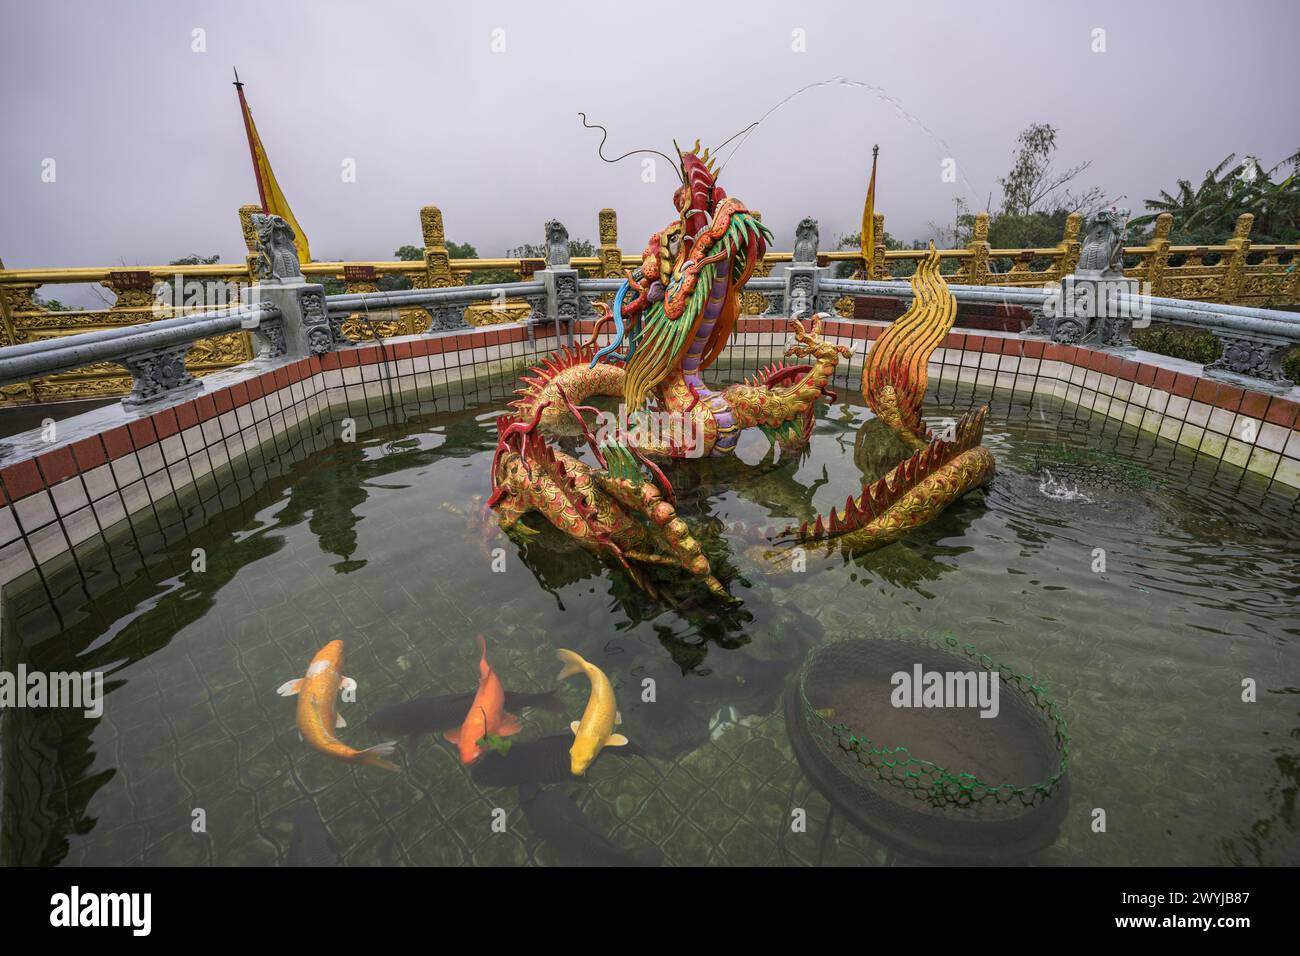 A colorful dragon statue emerges from a misty pond where there are colourful carps Stock Photo